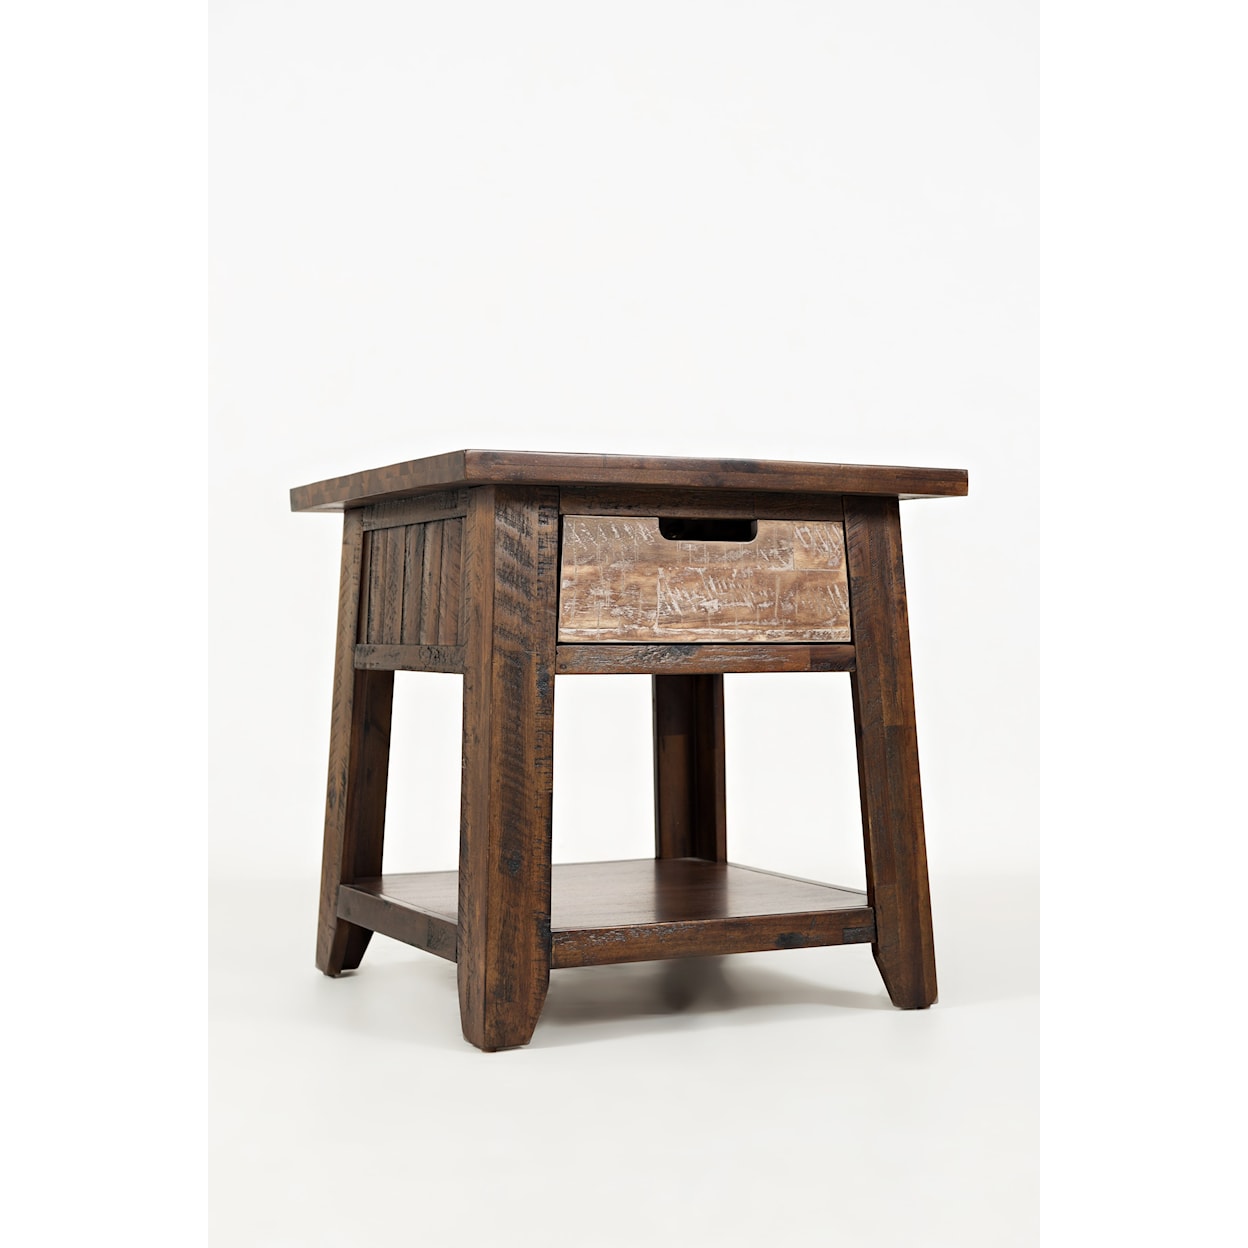 Belfort Essentials Painted Canyon End Table